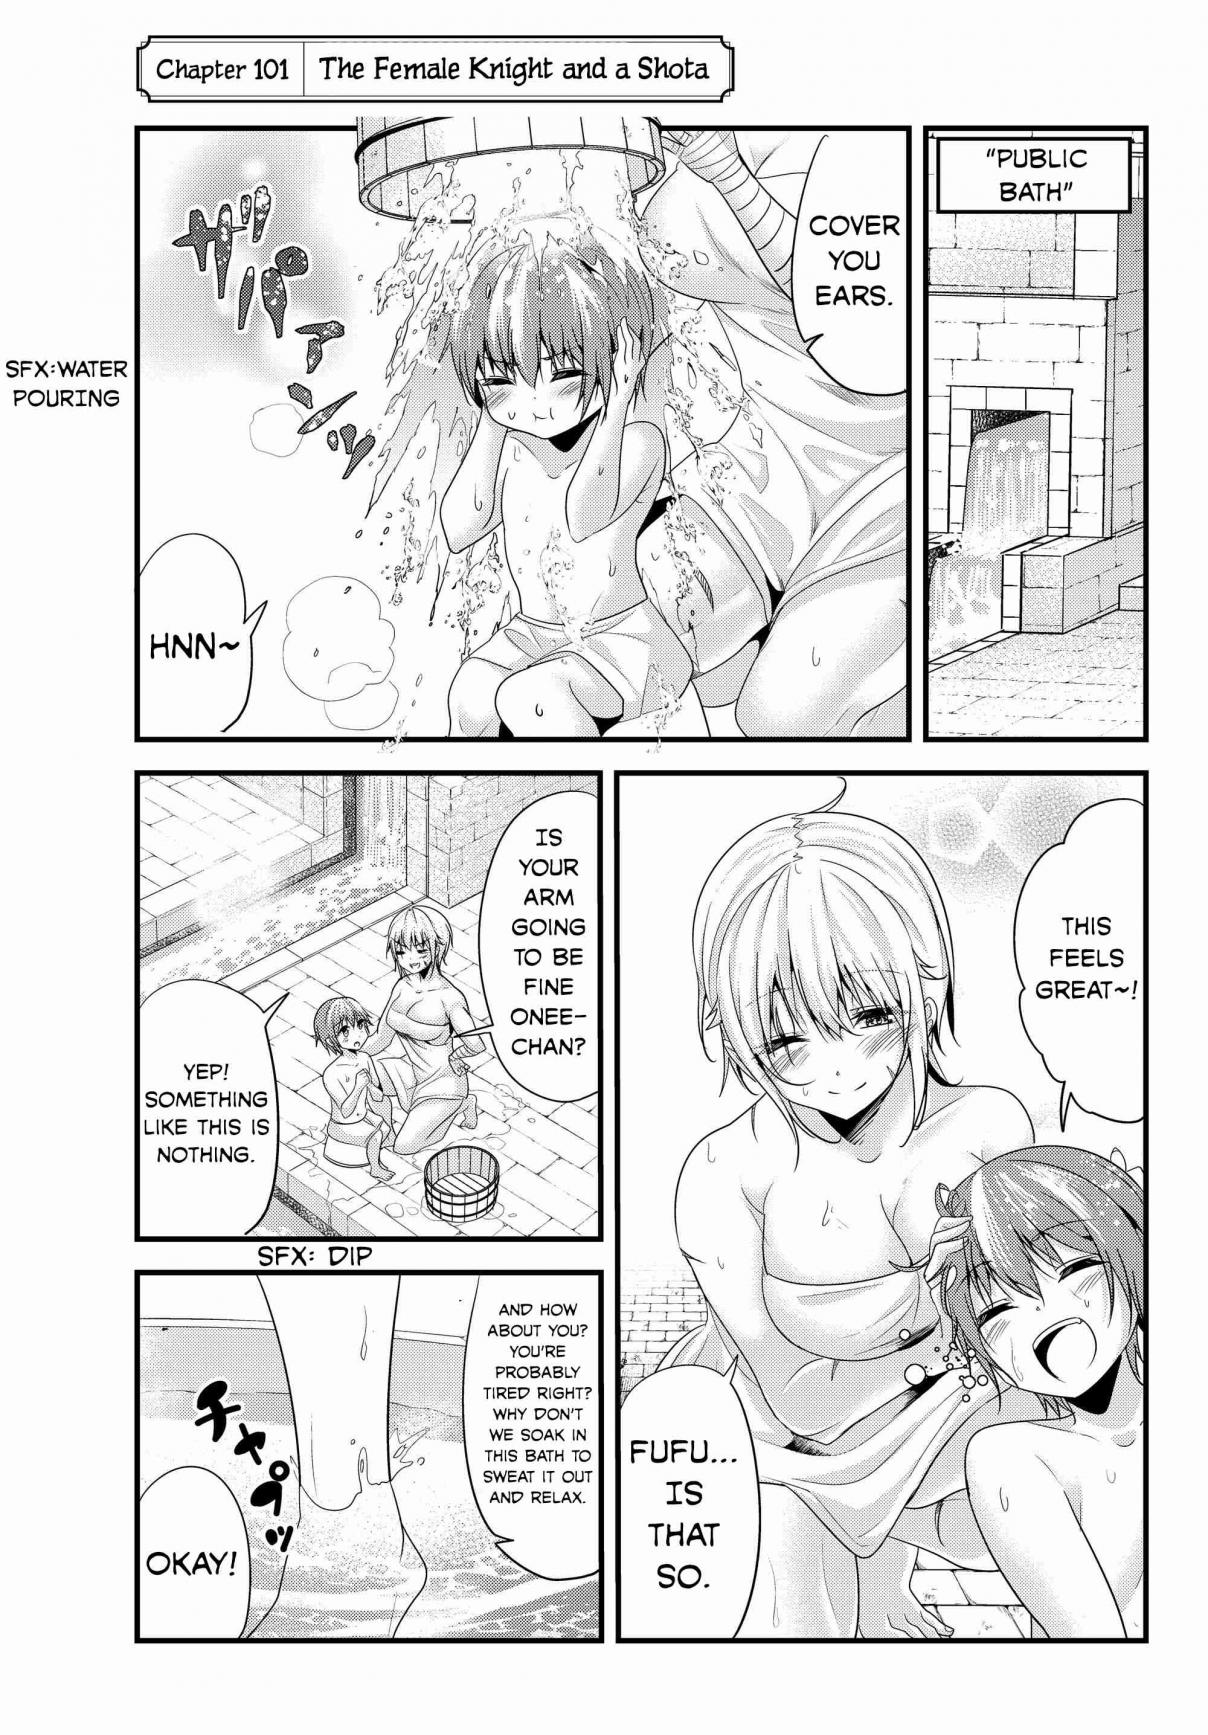 A Story About Treating a Female Knight, Who Has Never Been Treated as a Woman, as a Woman Ch. 101 The Female Knight and a Shota